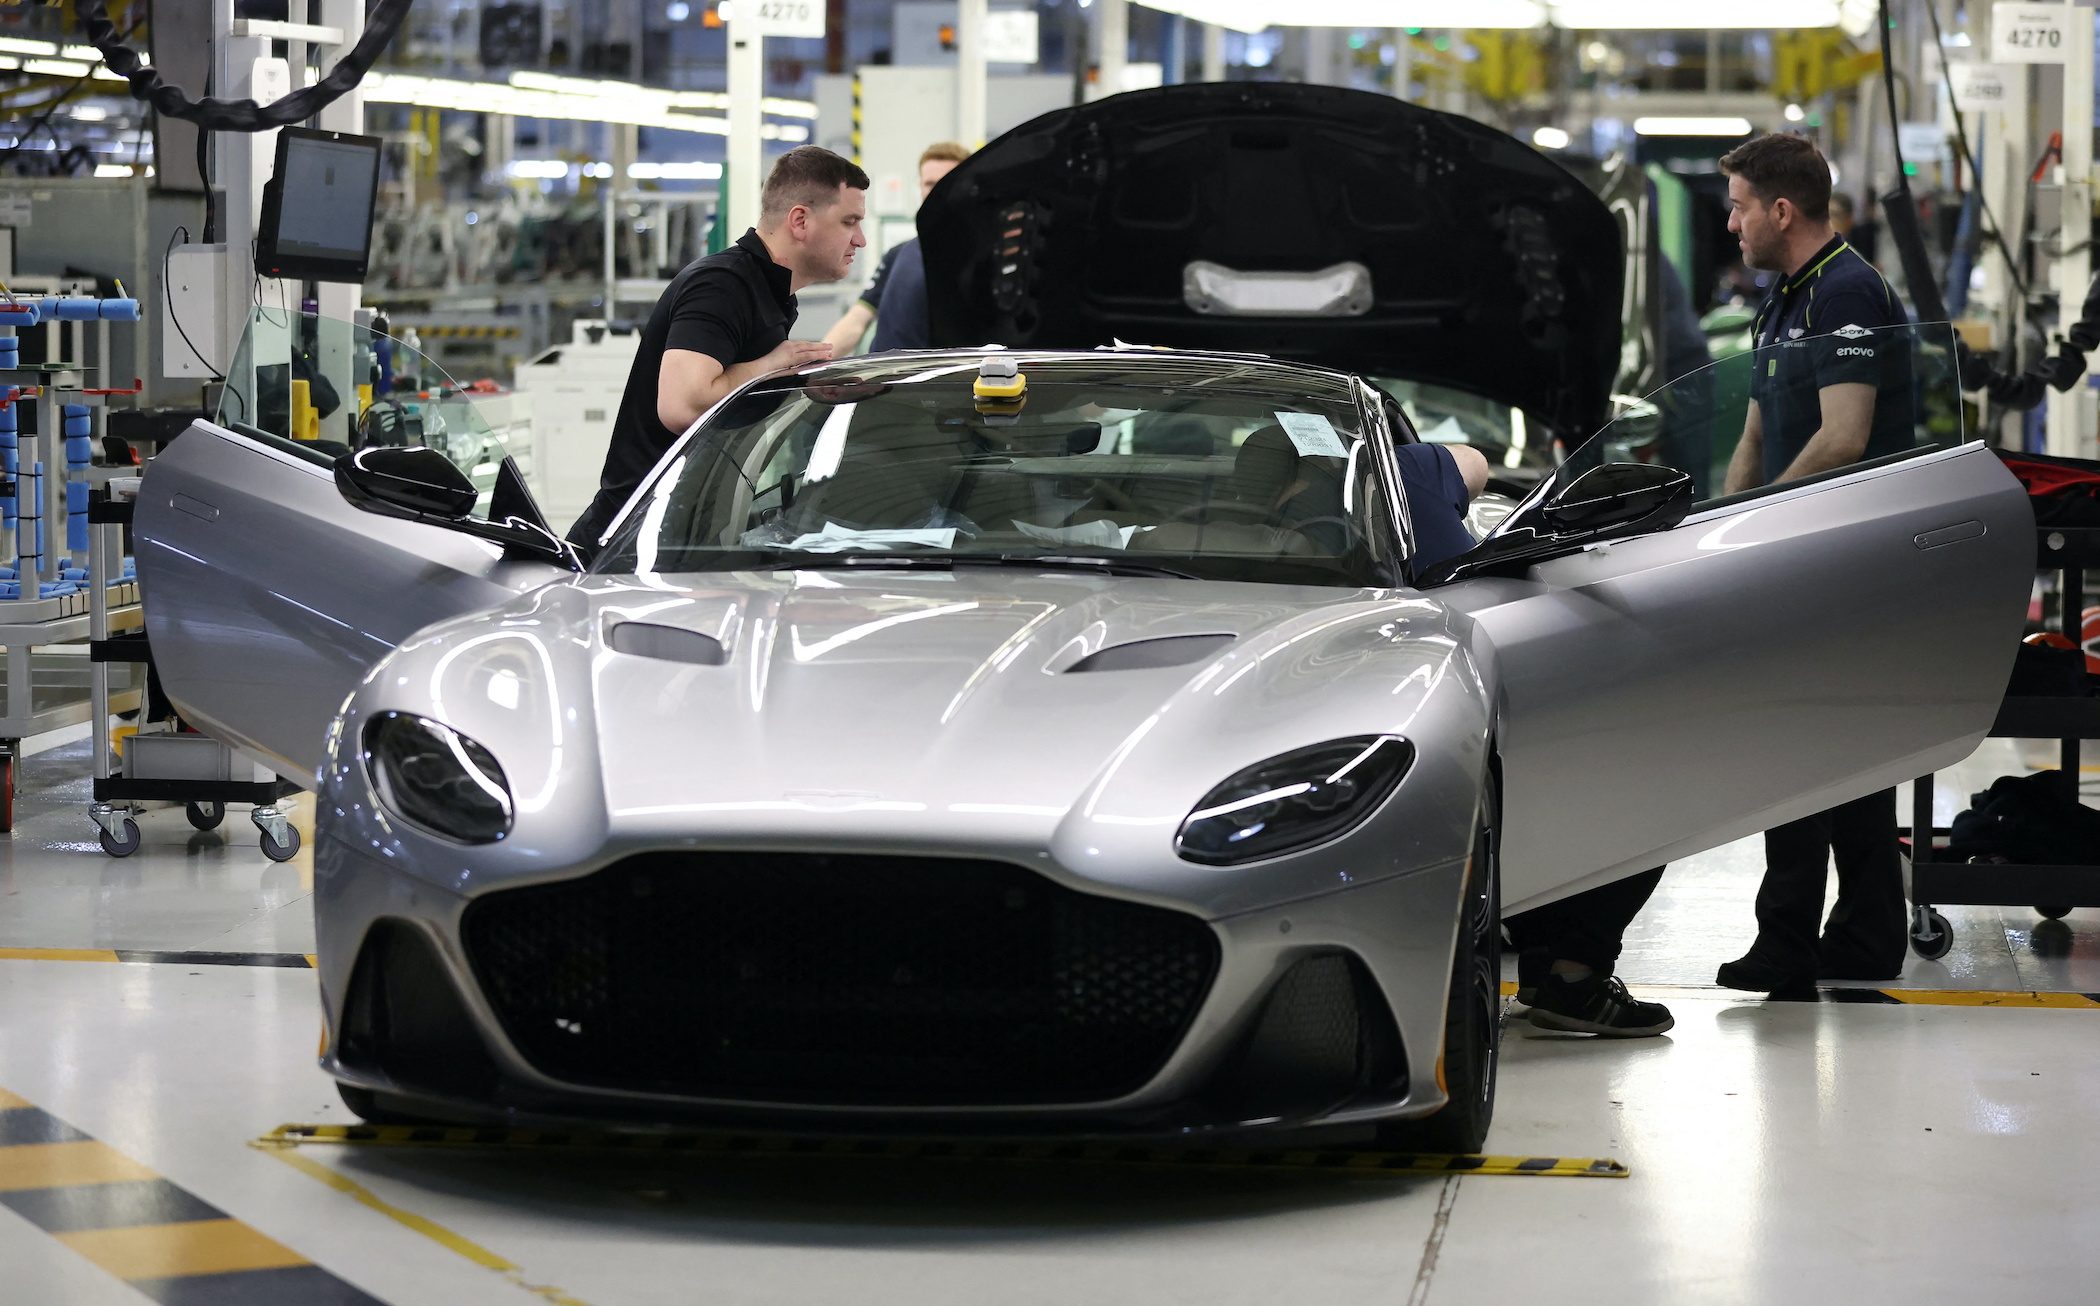 With lift from ‘big brother,’ Aston Martin chases after Ferrari